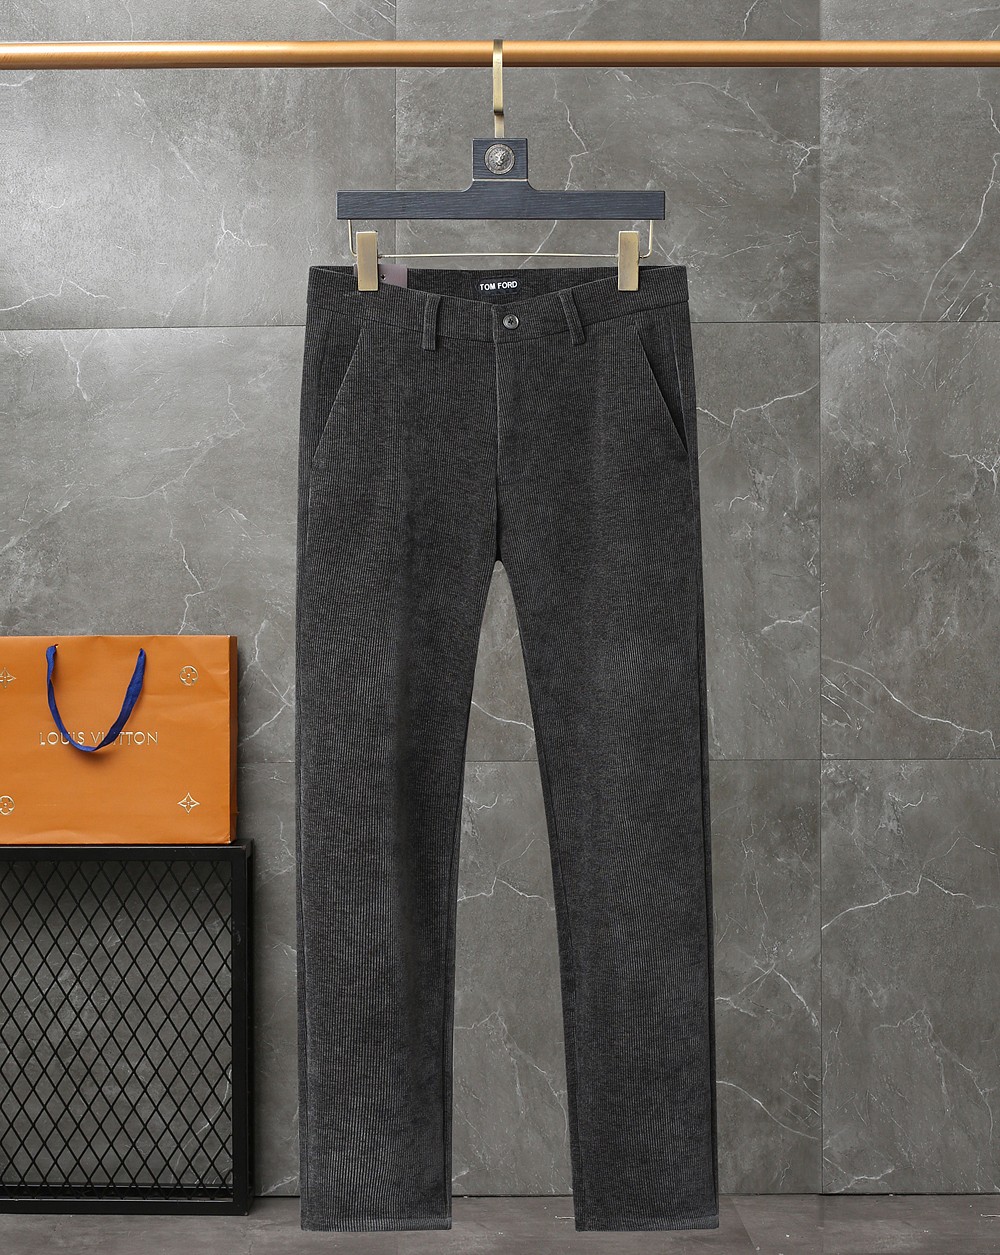 Tom Ford Clothing Pants & Trousers Black Blue Grey Light Gray Corduroy Cotton Fall/Winter Collection Casual